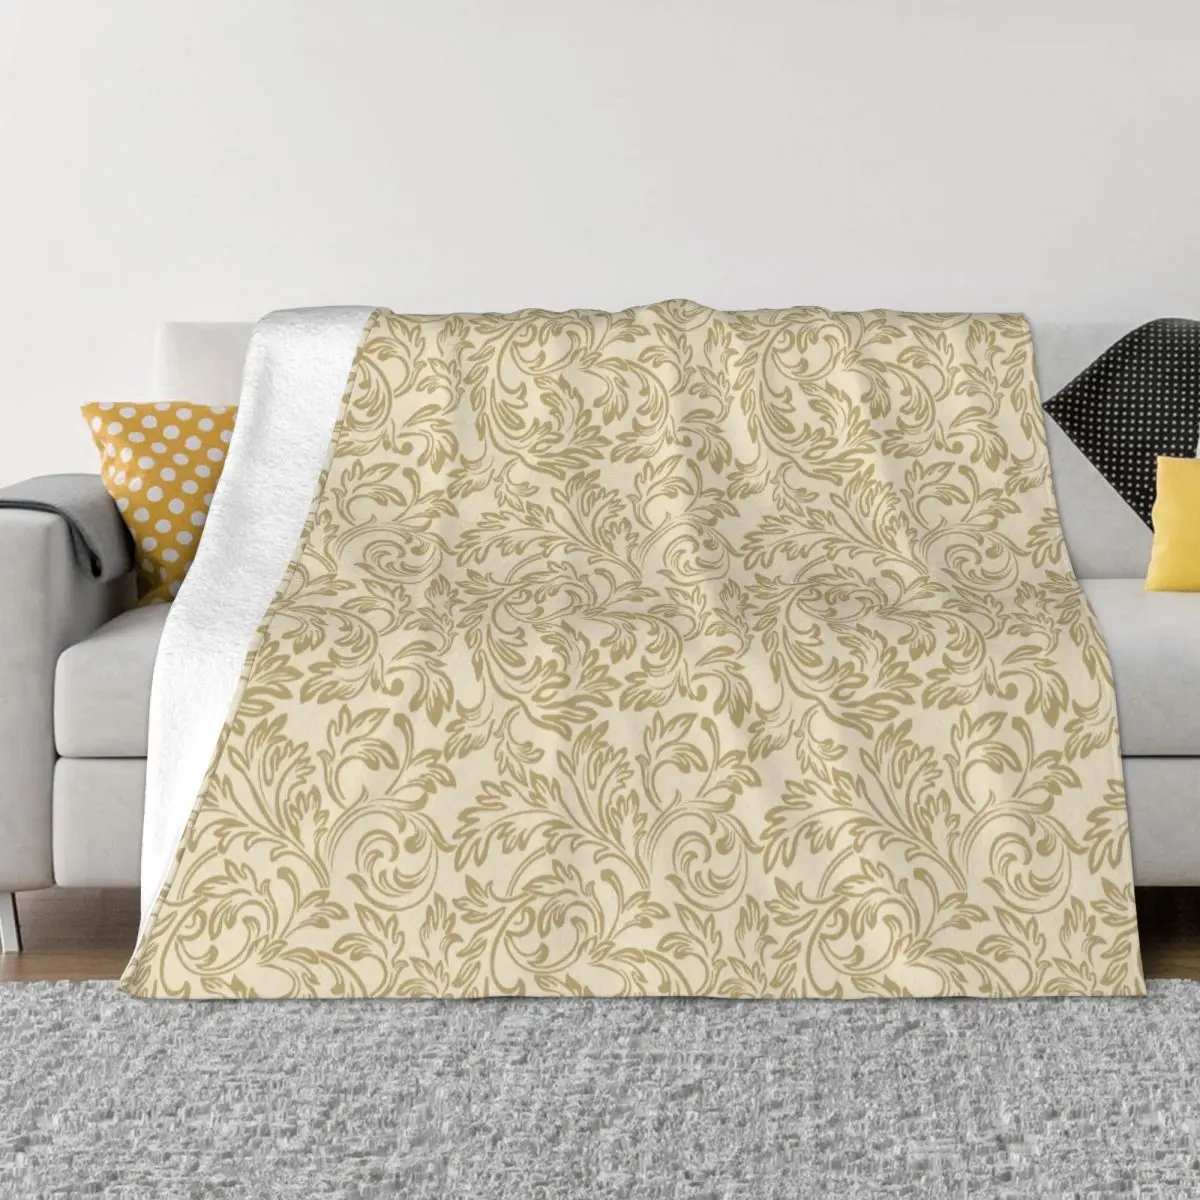 

Baroque Blanket Flannel Winter Gold Leaves Multi-function Super Warm Throw Blankets for Bed Travel Bedspread